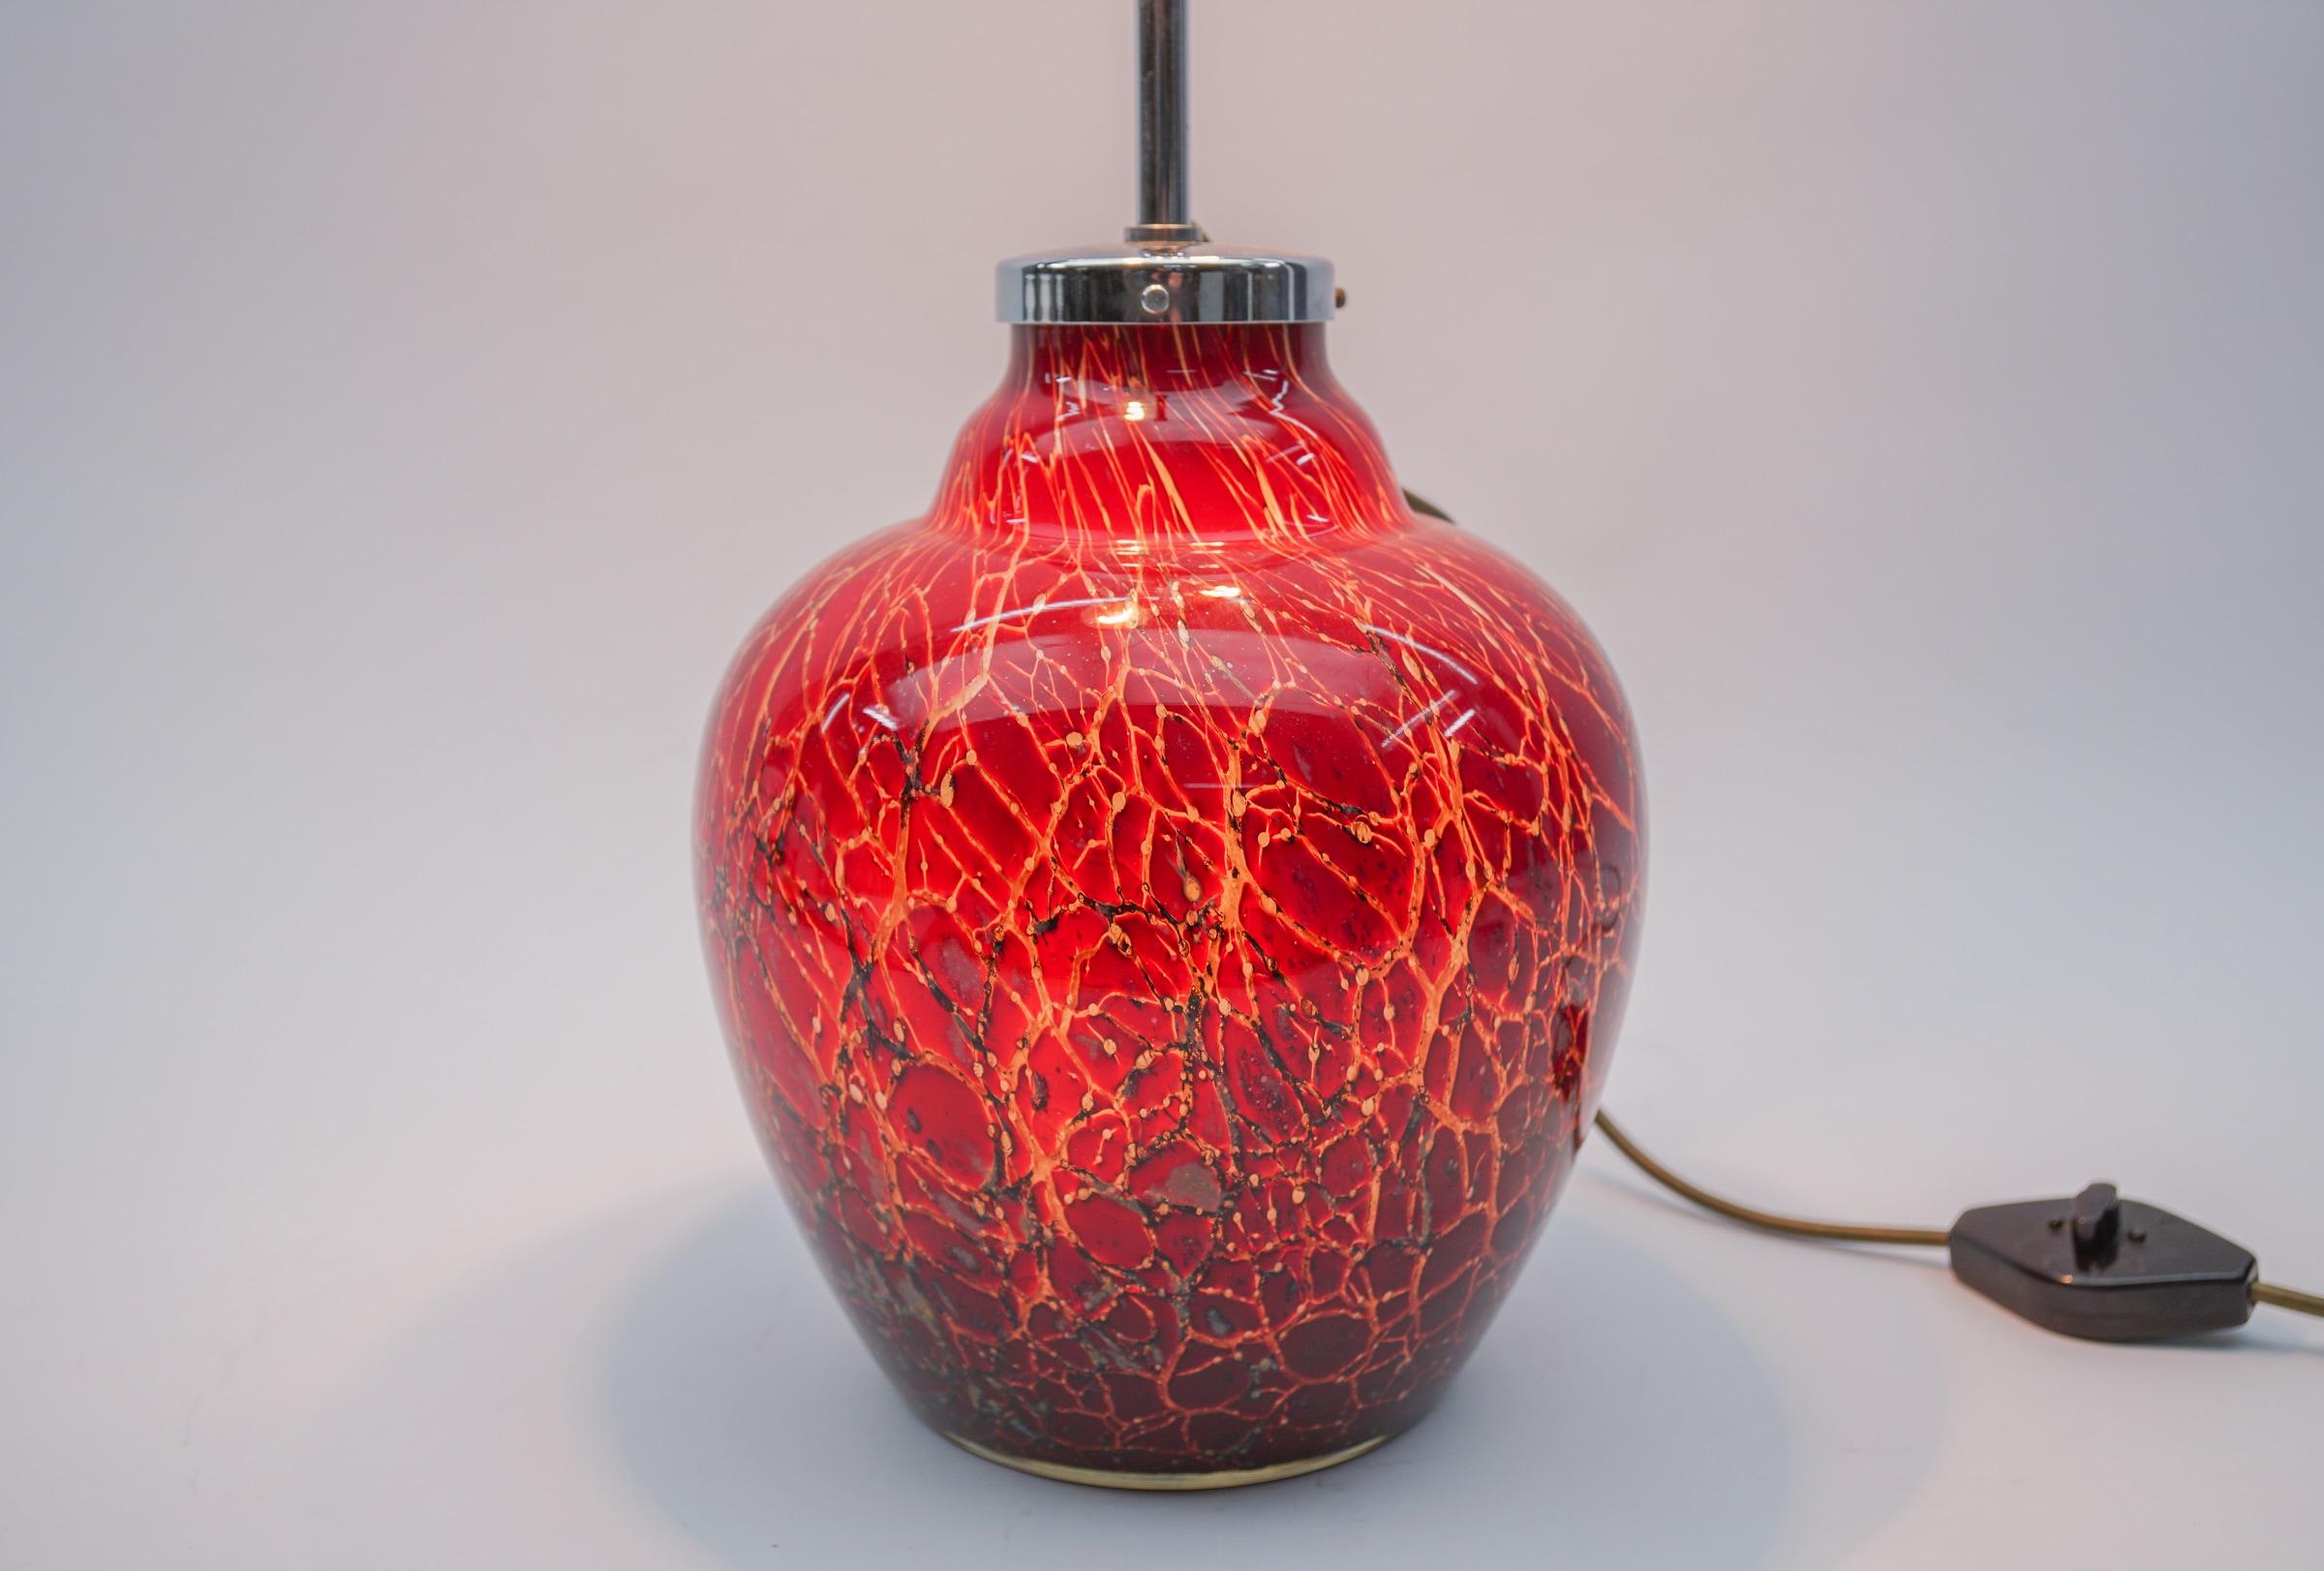 Blown Glass Art Deco WMF Ikora Red Glass Table Lamp, 1930s Germany For Sale